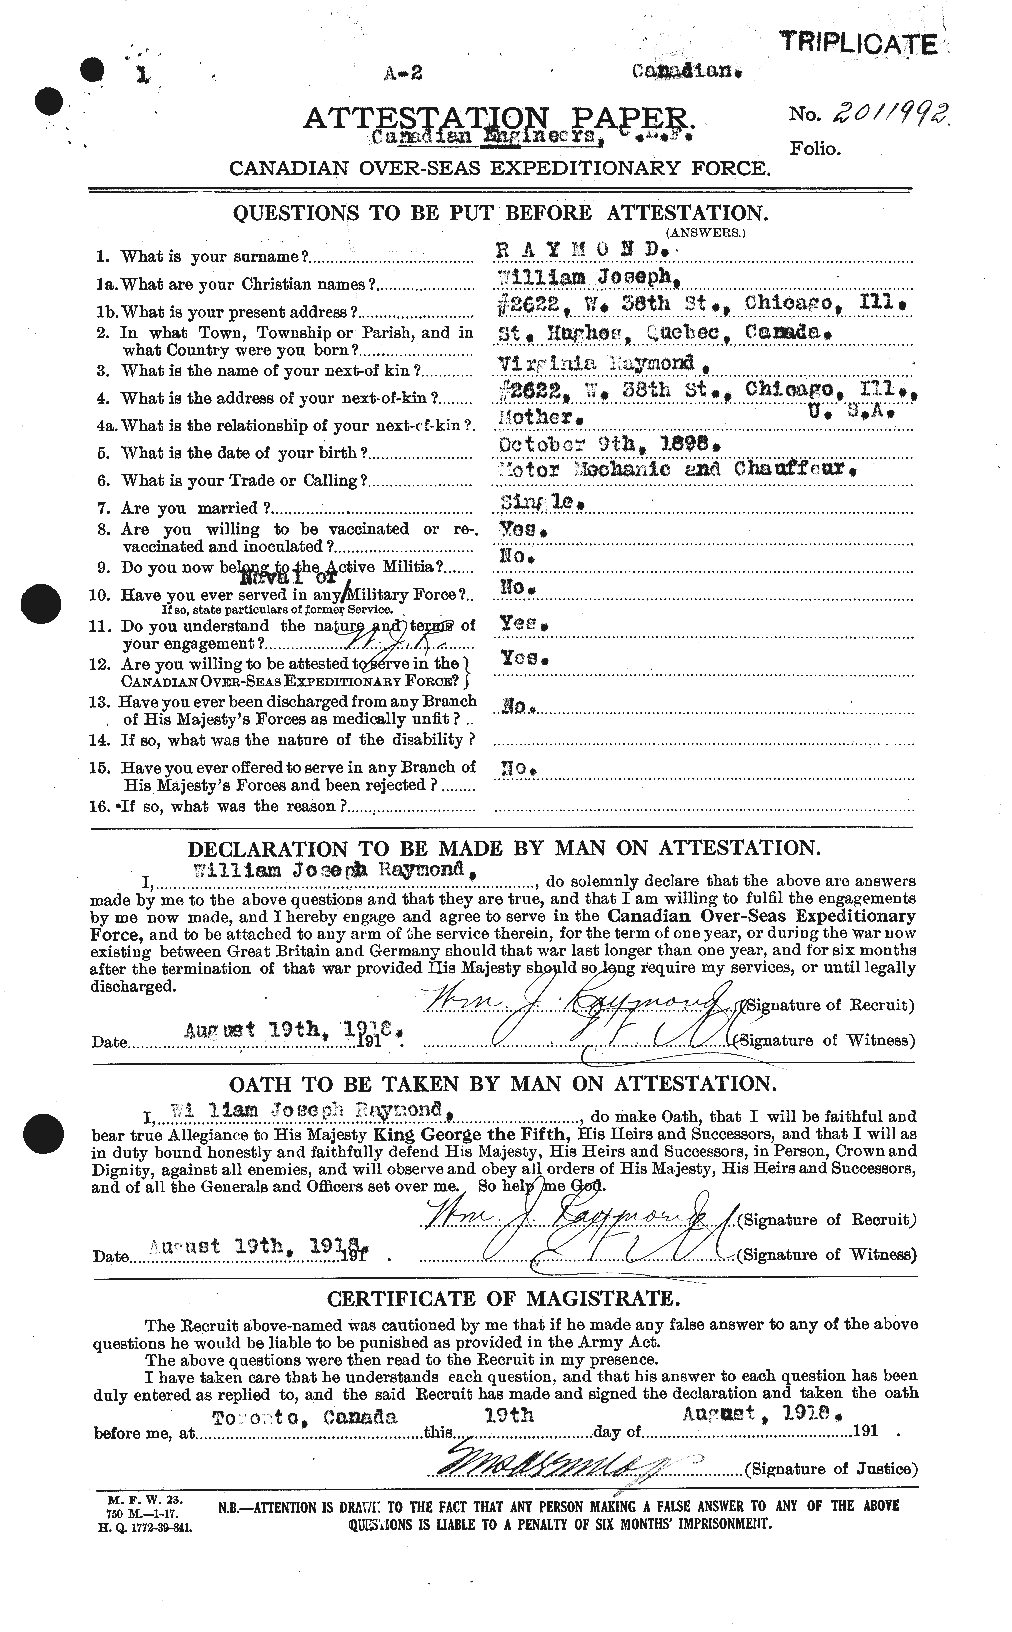 Personnel Records of the First World War - CEF 595476a